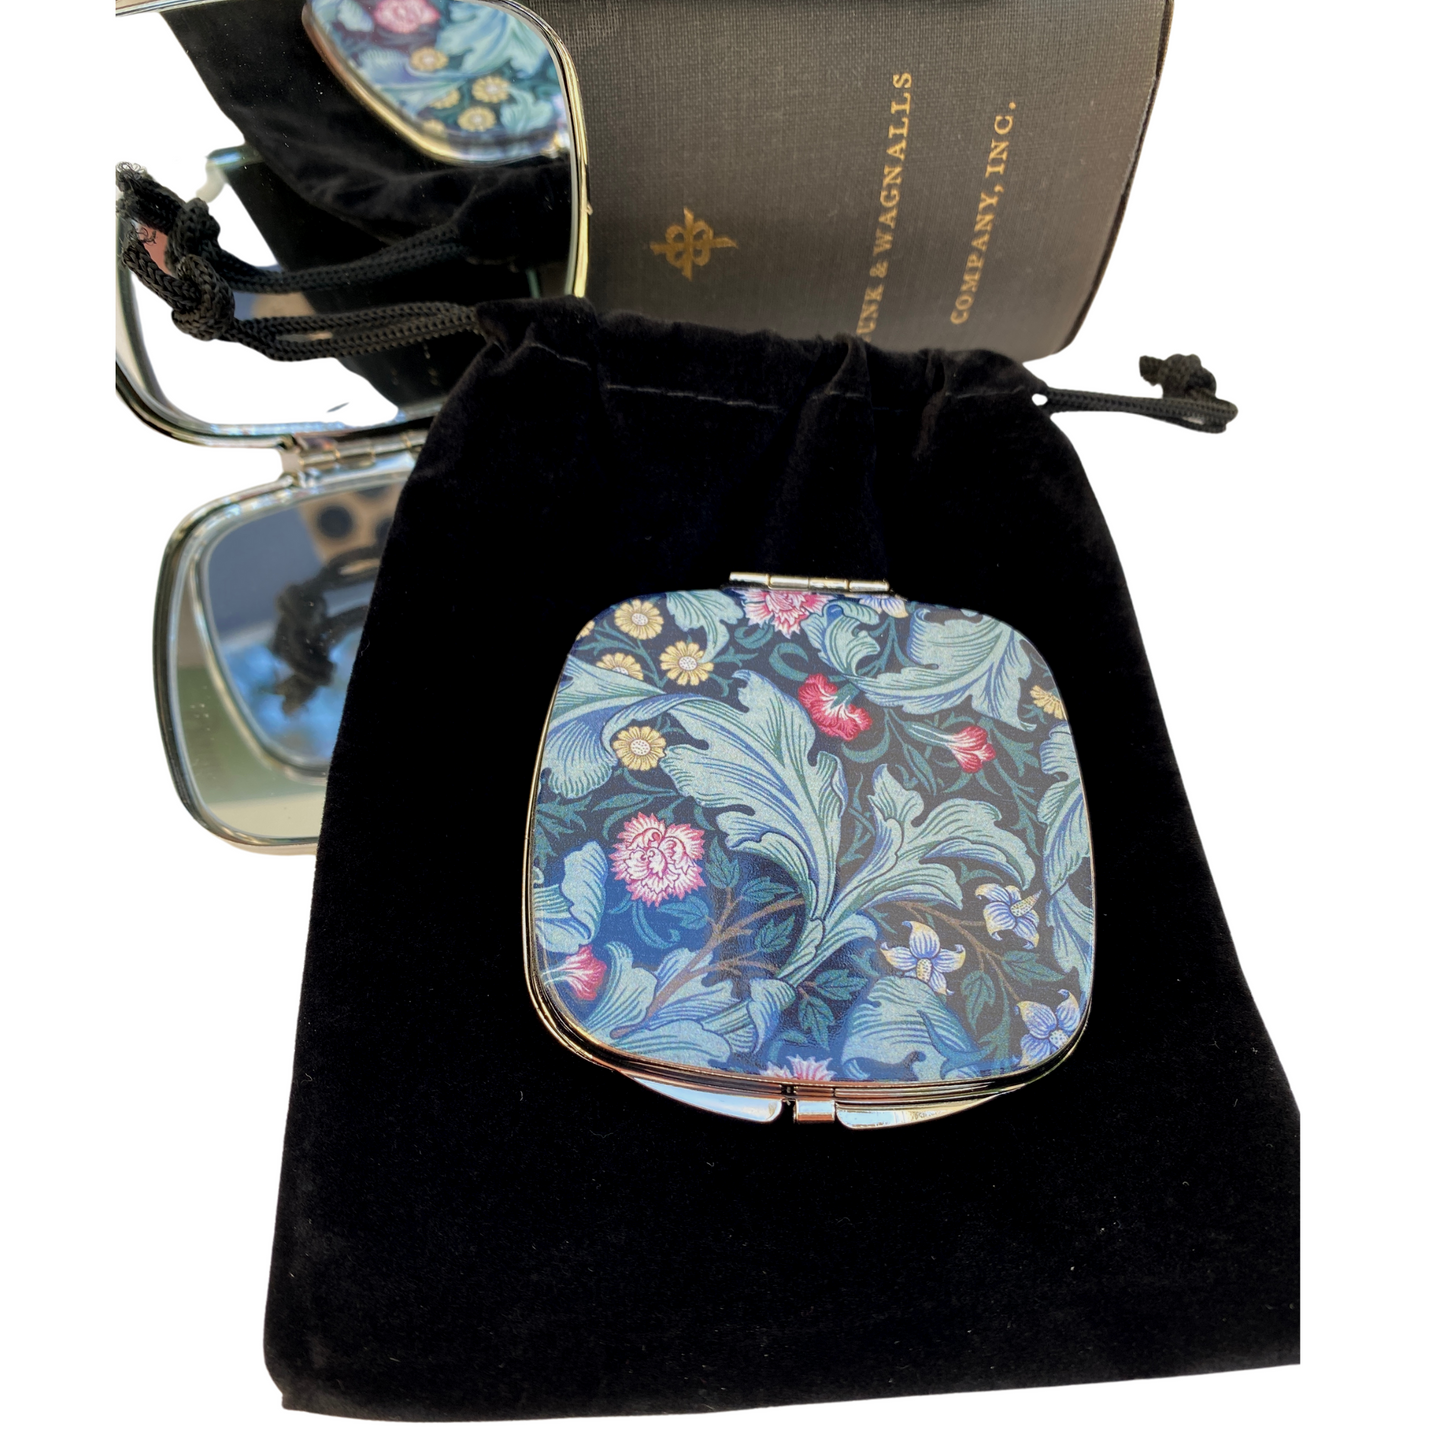 Purse Mirror William Morris Art, Black Background, Green leaves, Colorful Flowers